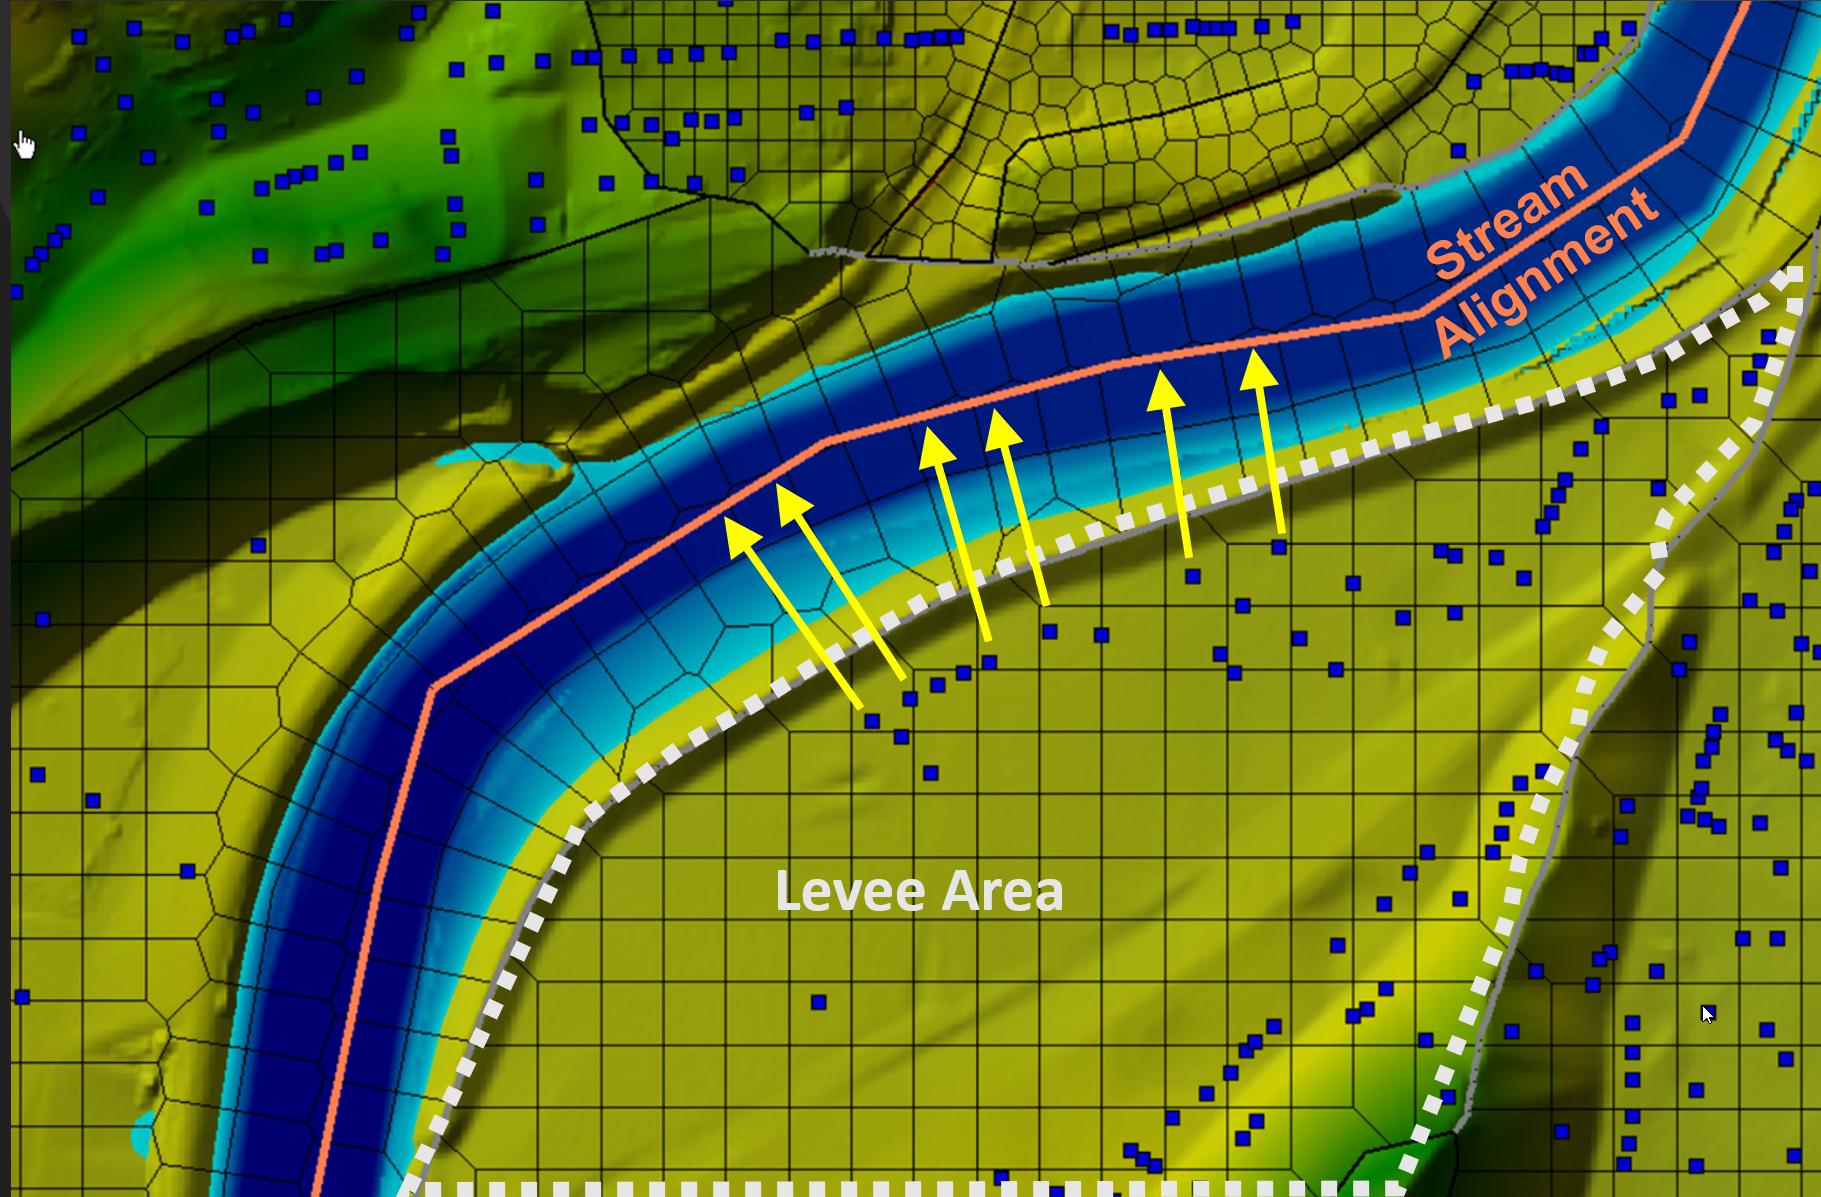 Estimating Damages Behind Levees with In-Channel WSELs